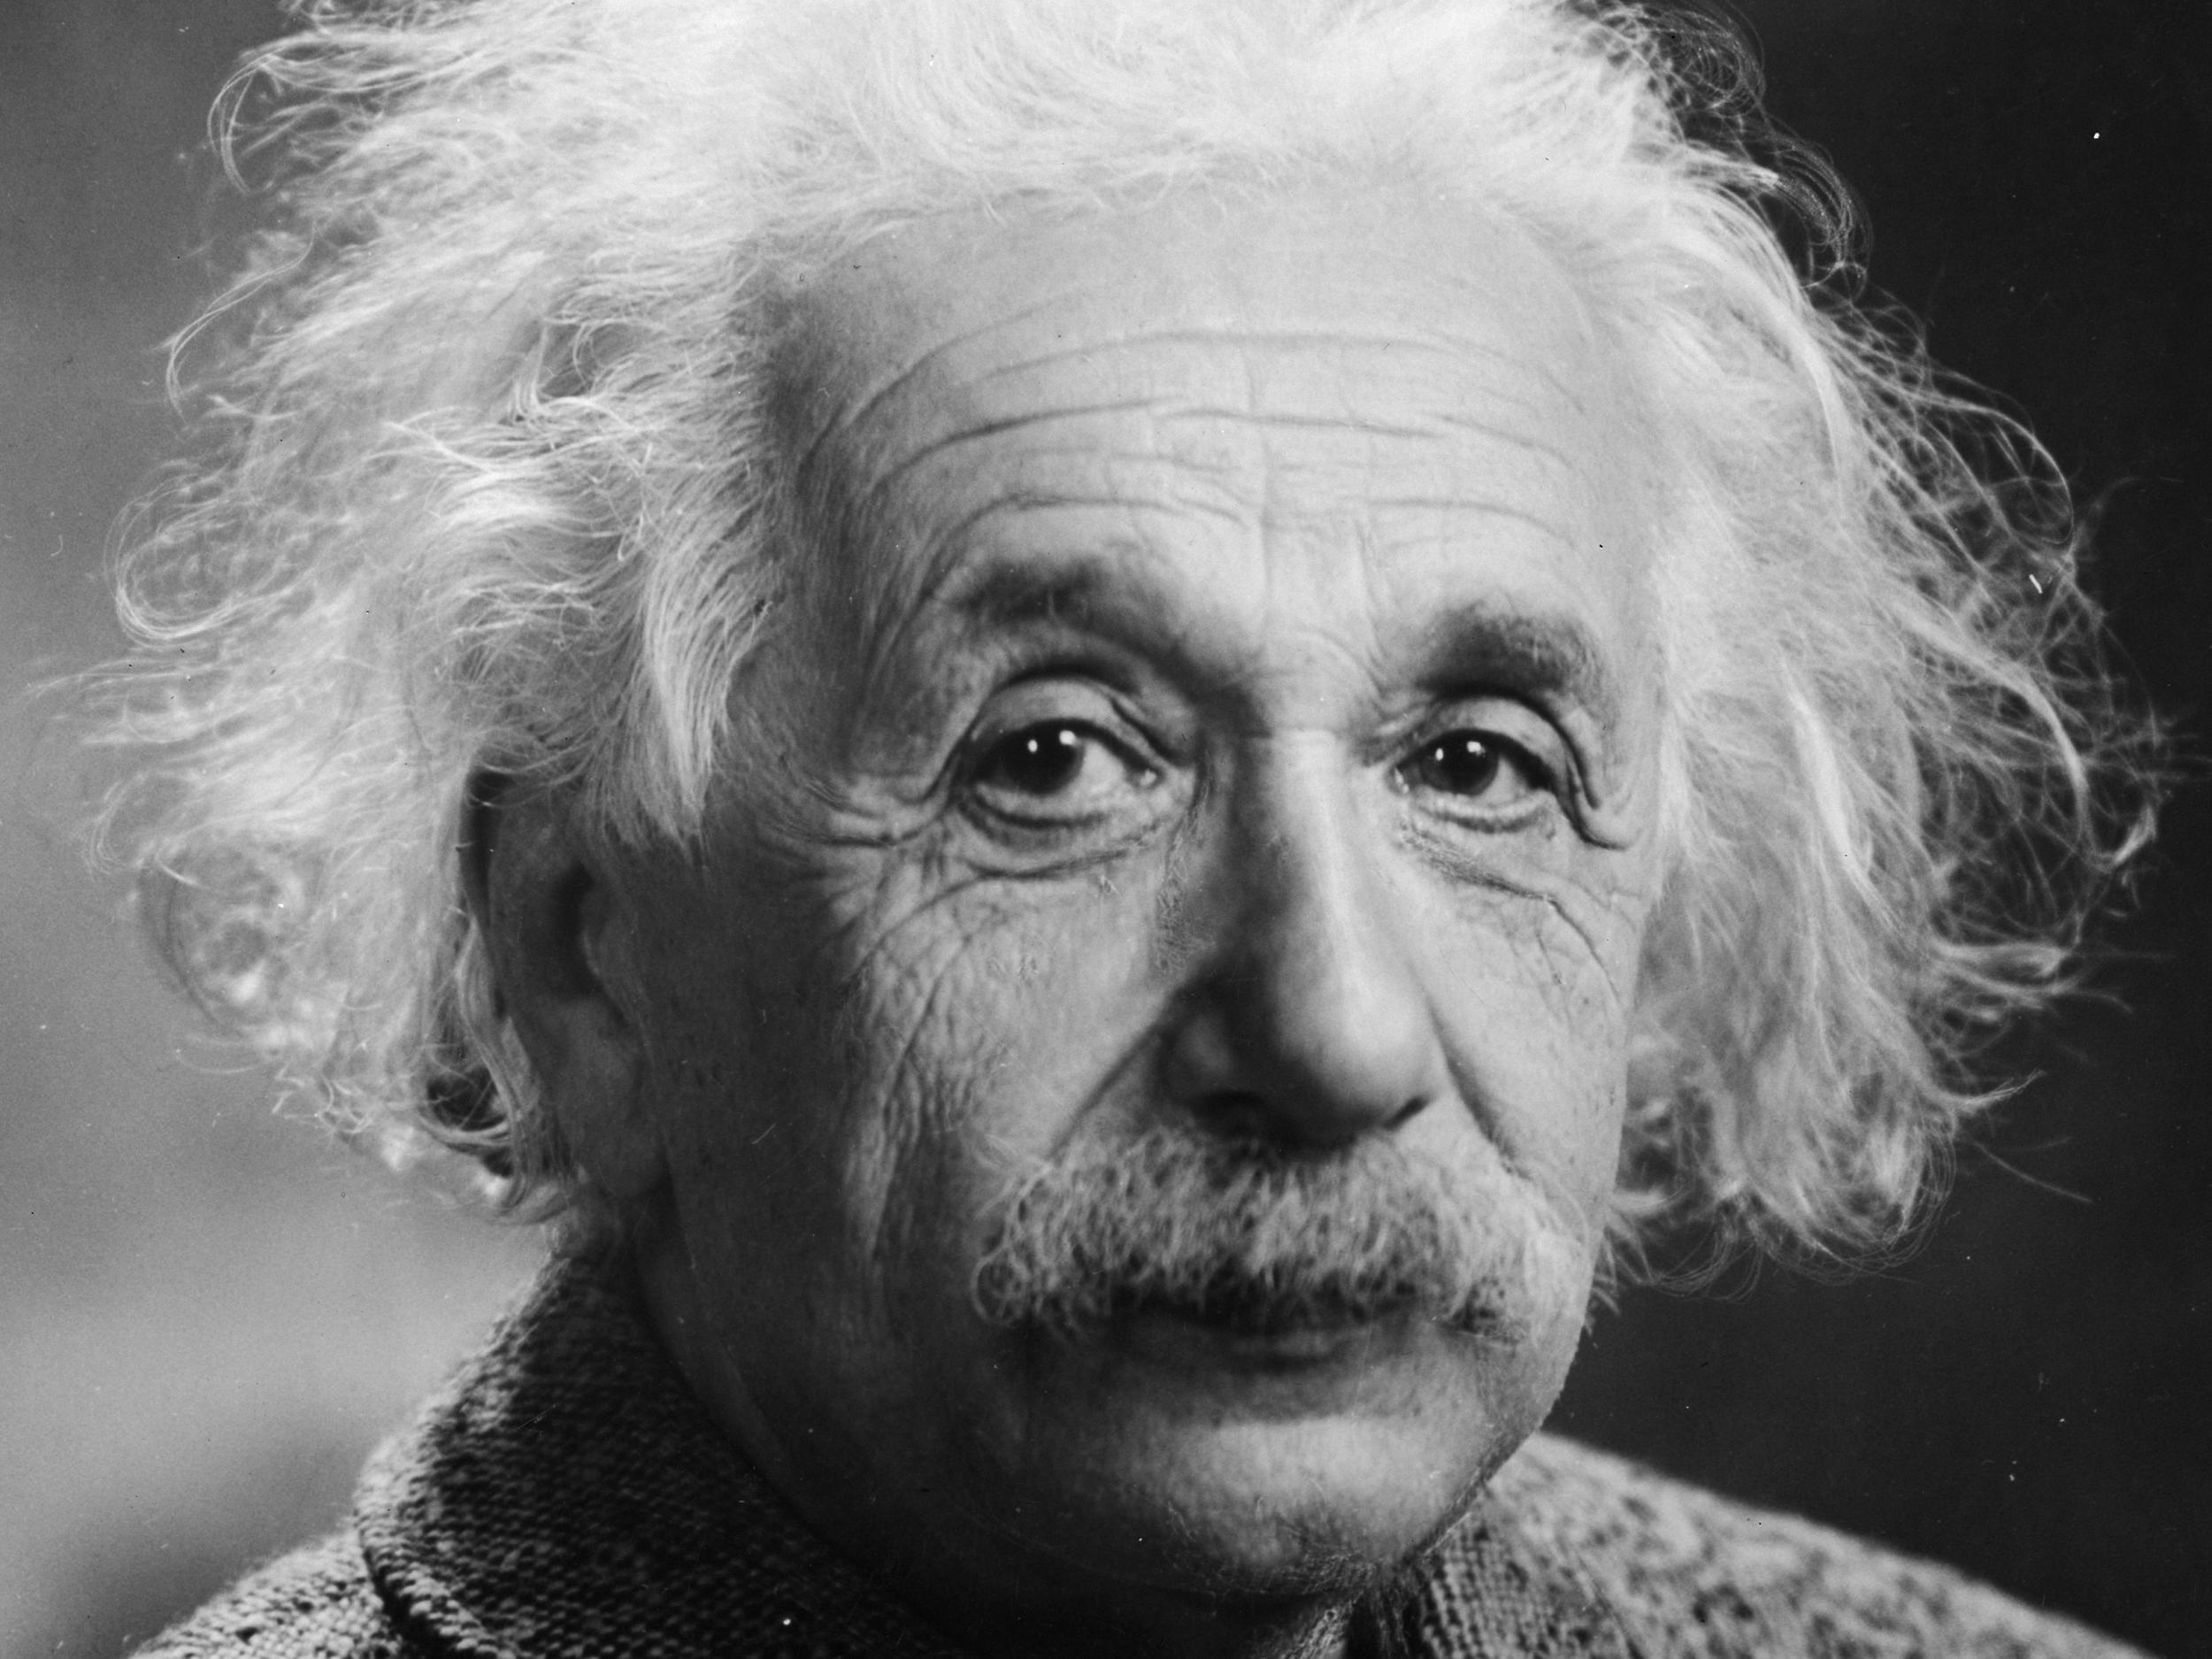 Albert Einstein, one of the greatest scientists of all time